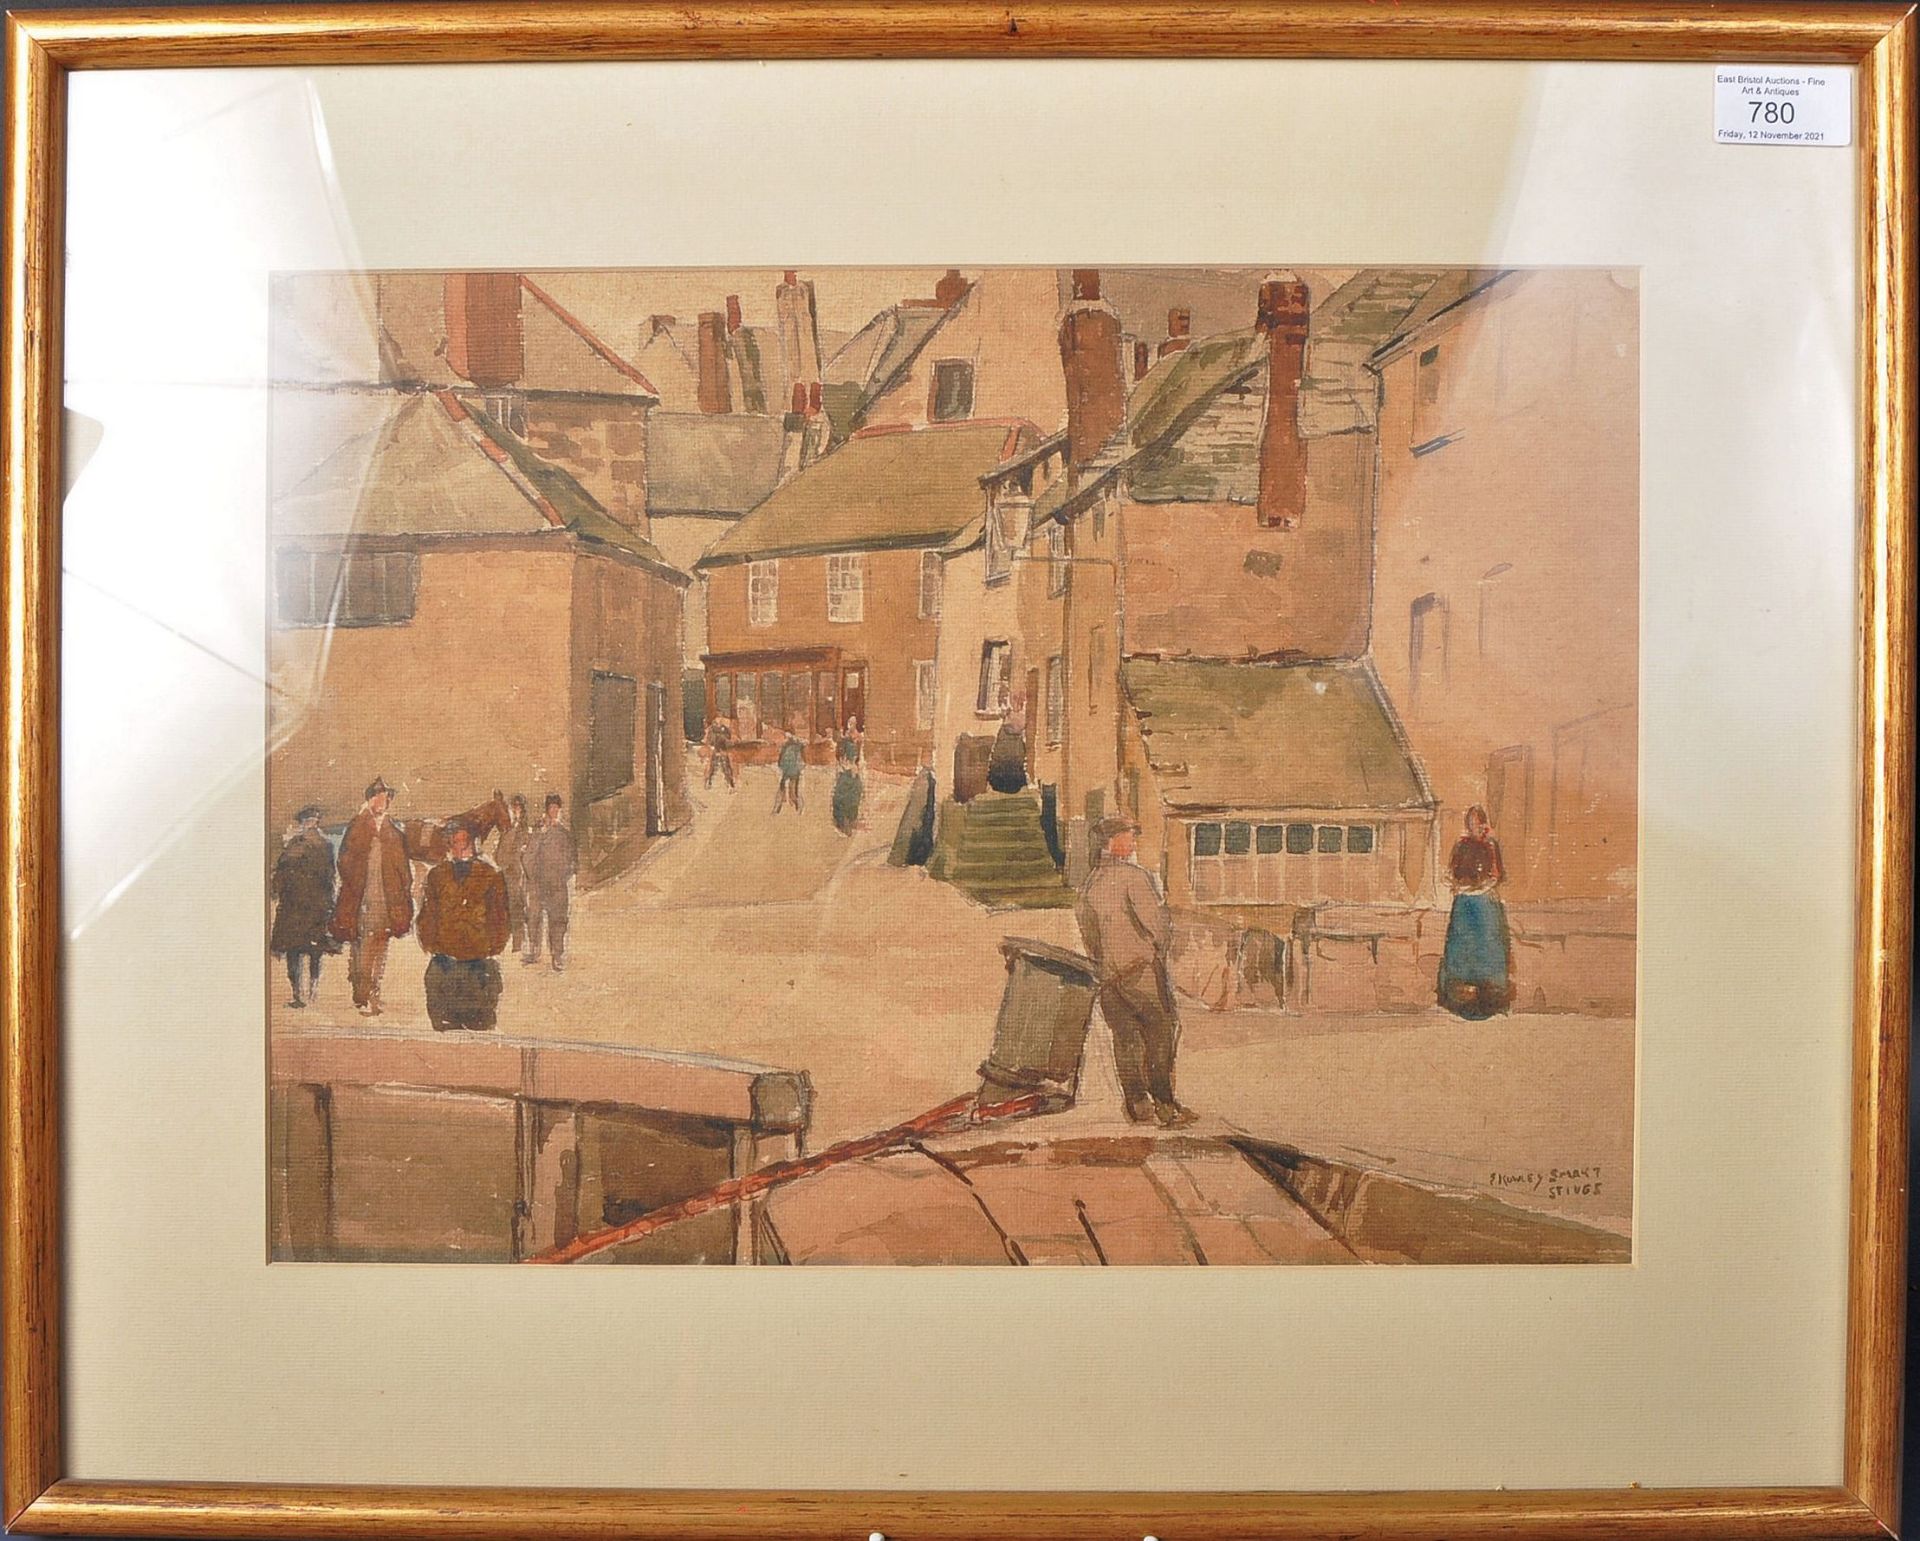 EDGAR ROWLEY SMART (1887-1934) - WATERCOLOUR PAINTING OF ST IVES